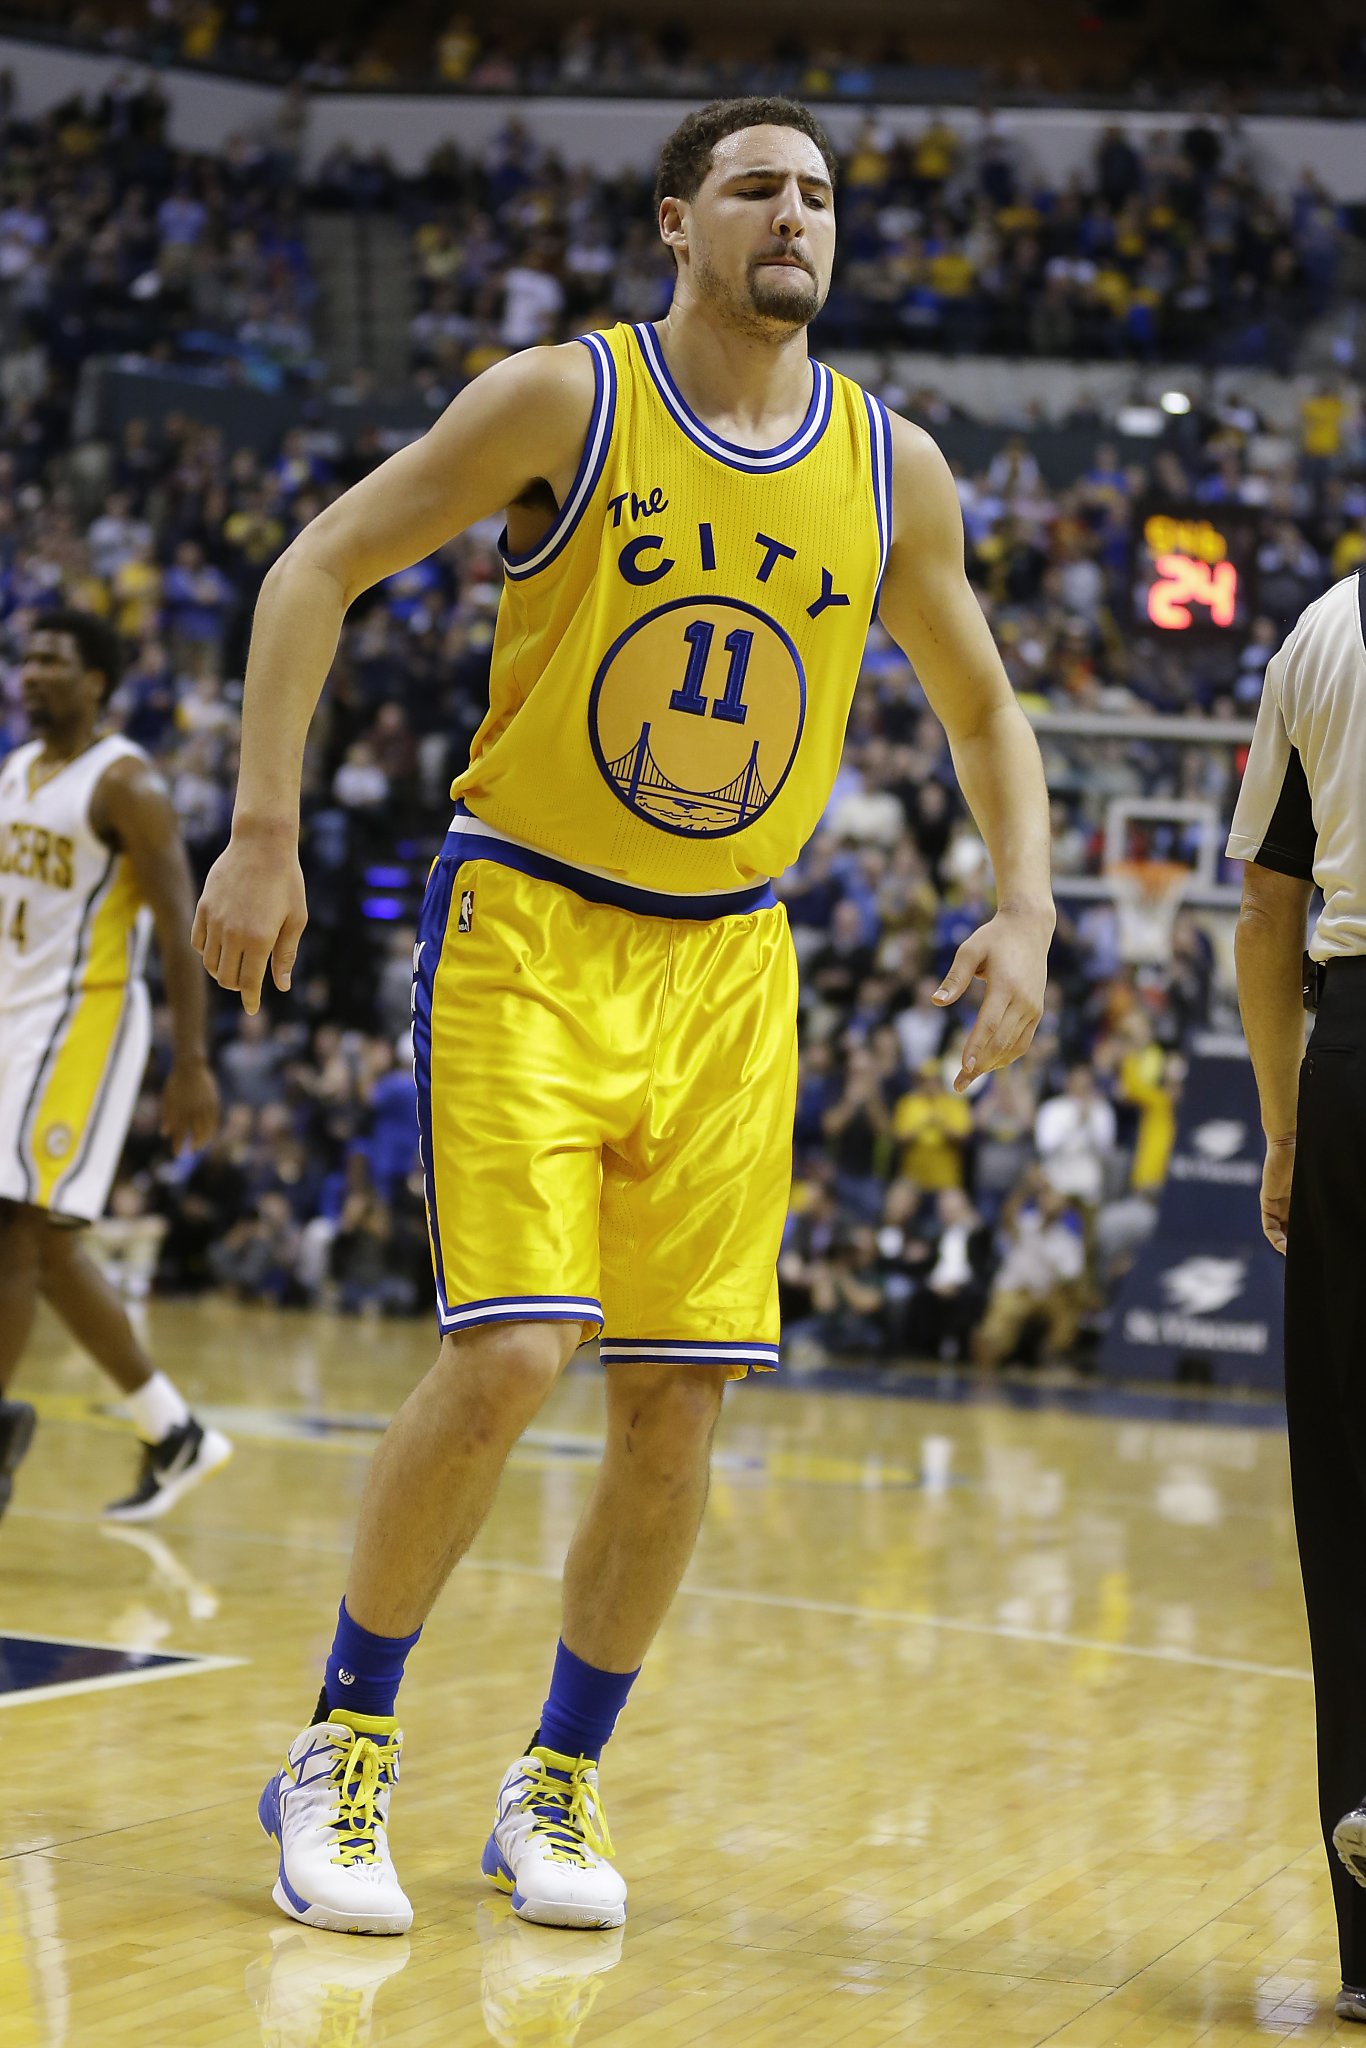 Ex-teammate David Lee among many links in Warriors-Spurs series